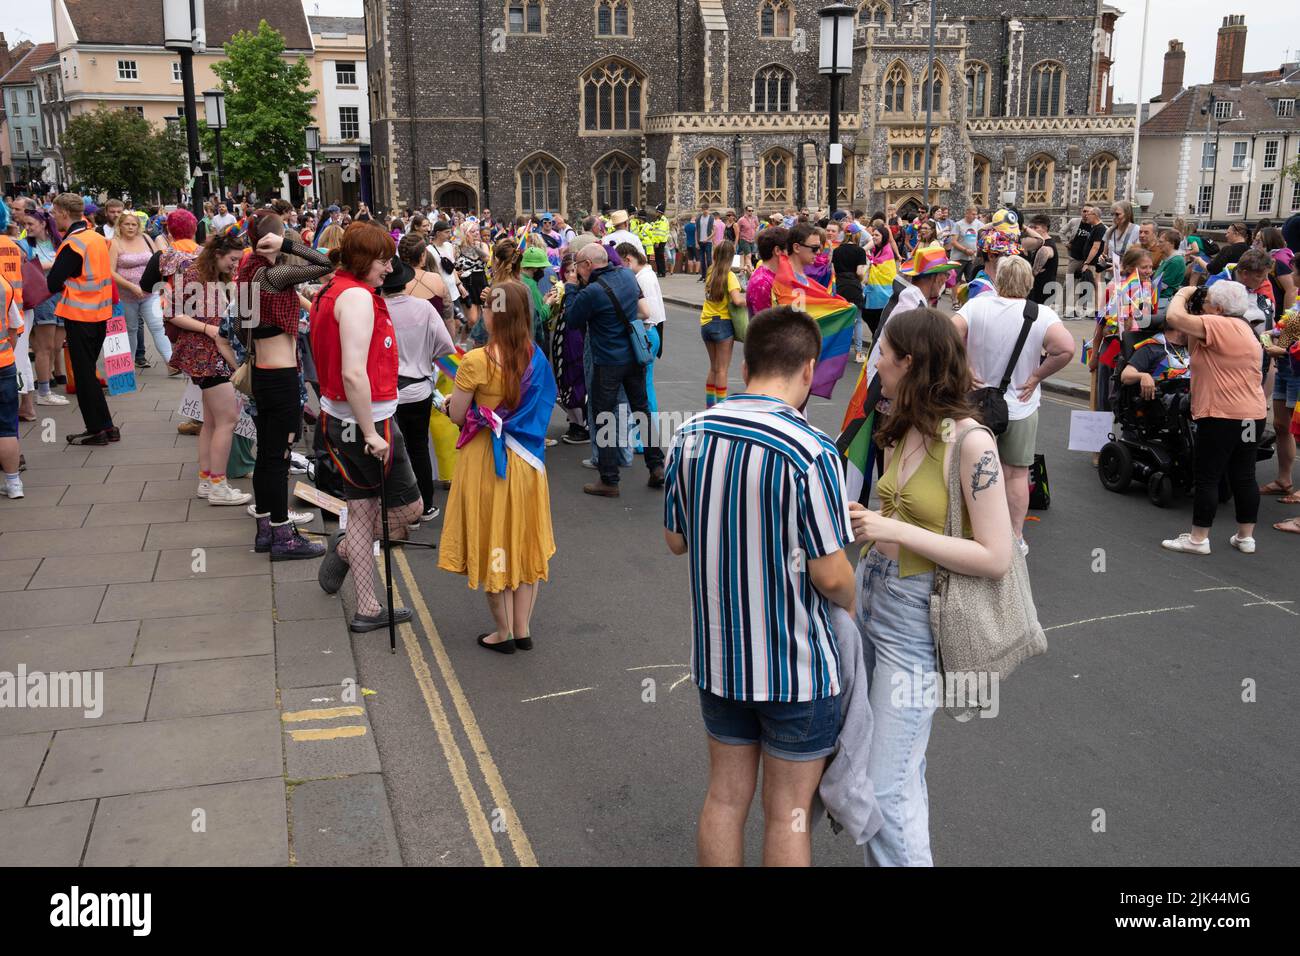 people waiting on kerbside waiting for LGBT Pride march to go ahead Stock Photo